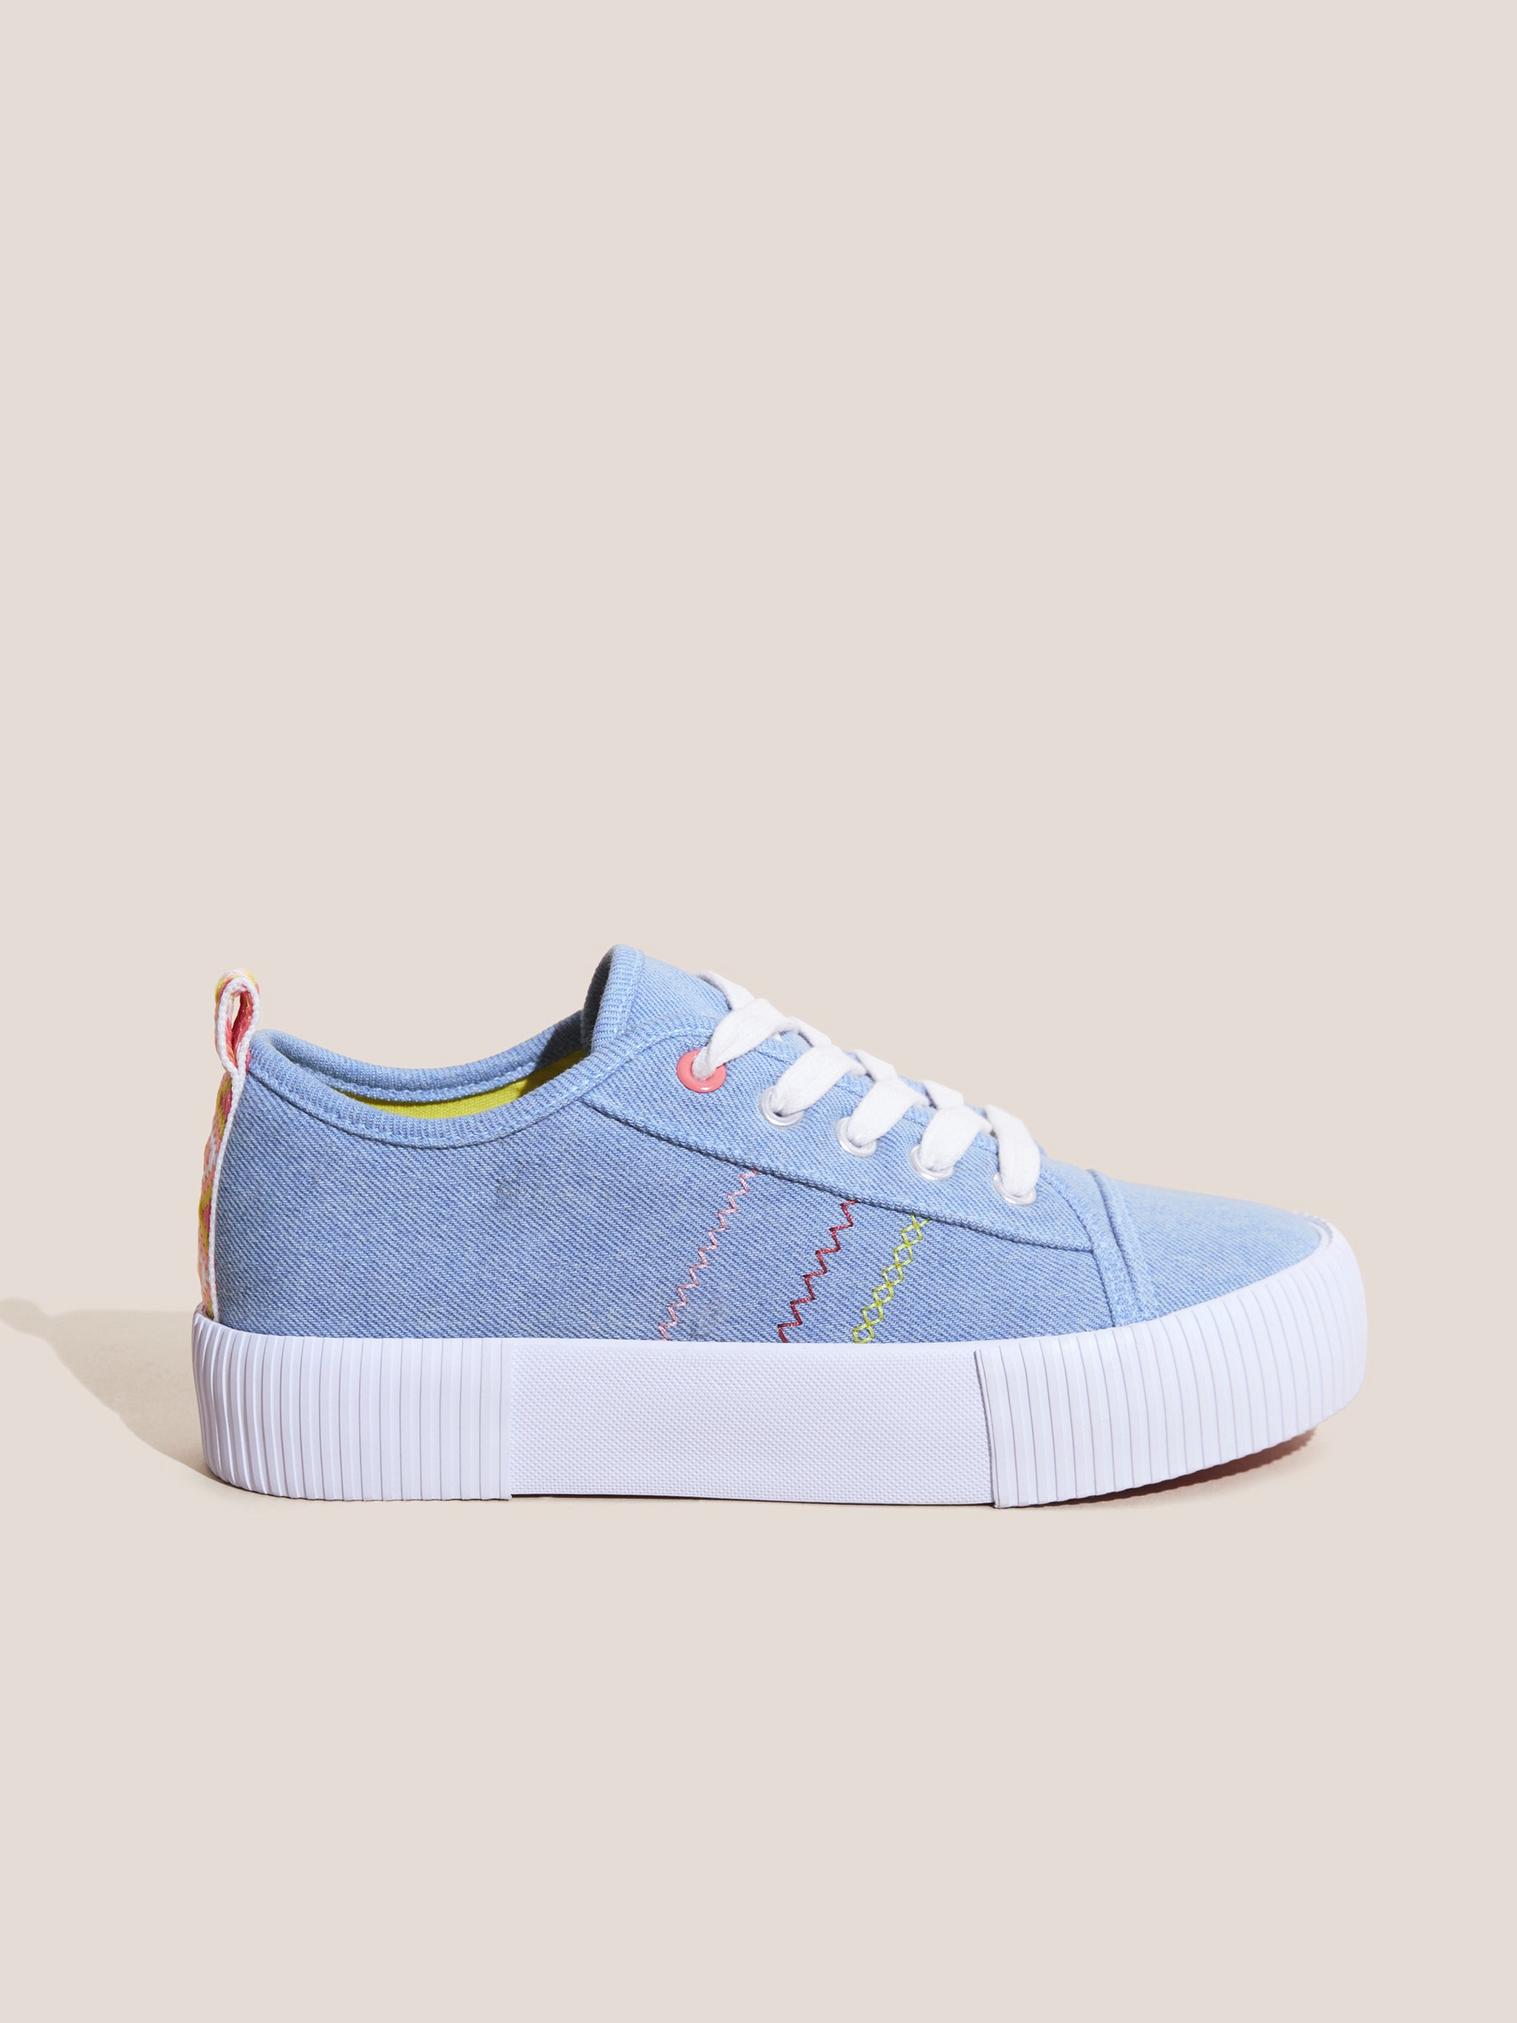 Piper Flatform Plimsoll in CHAMB BLUE - MODEL FRONT